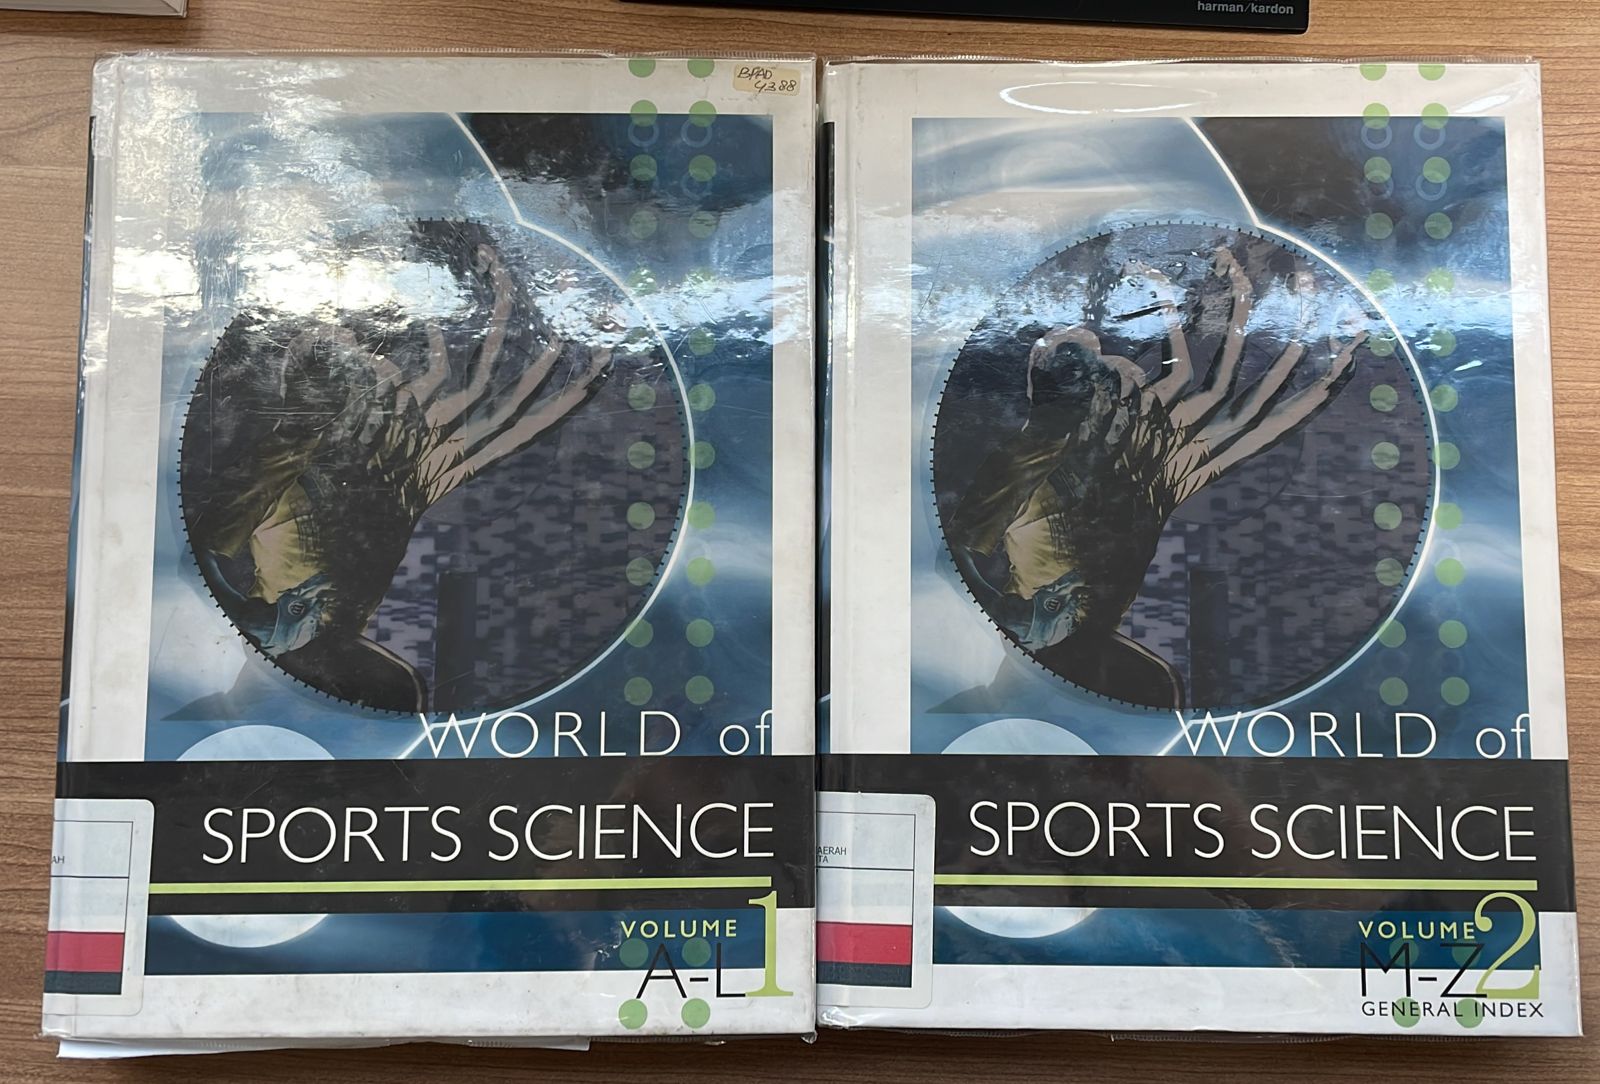 World of sports science